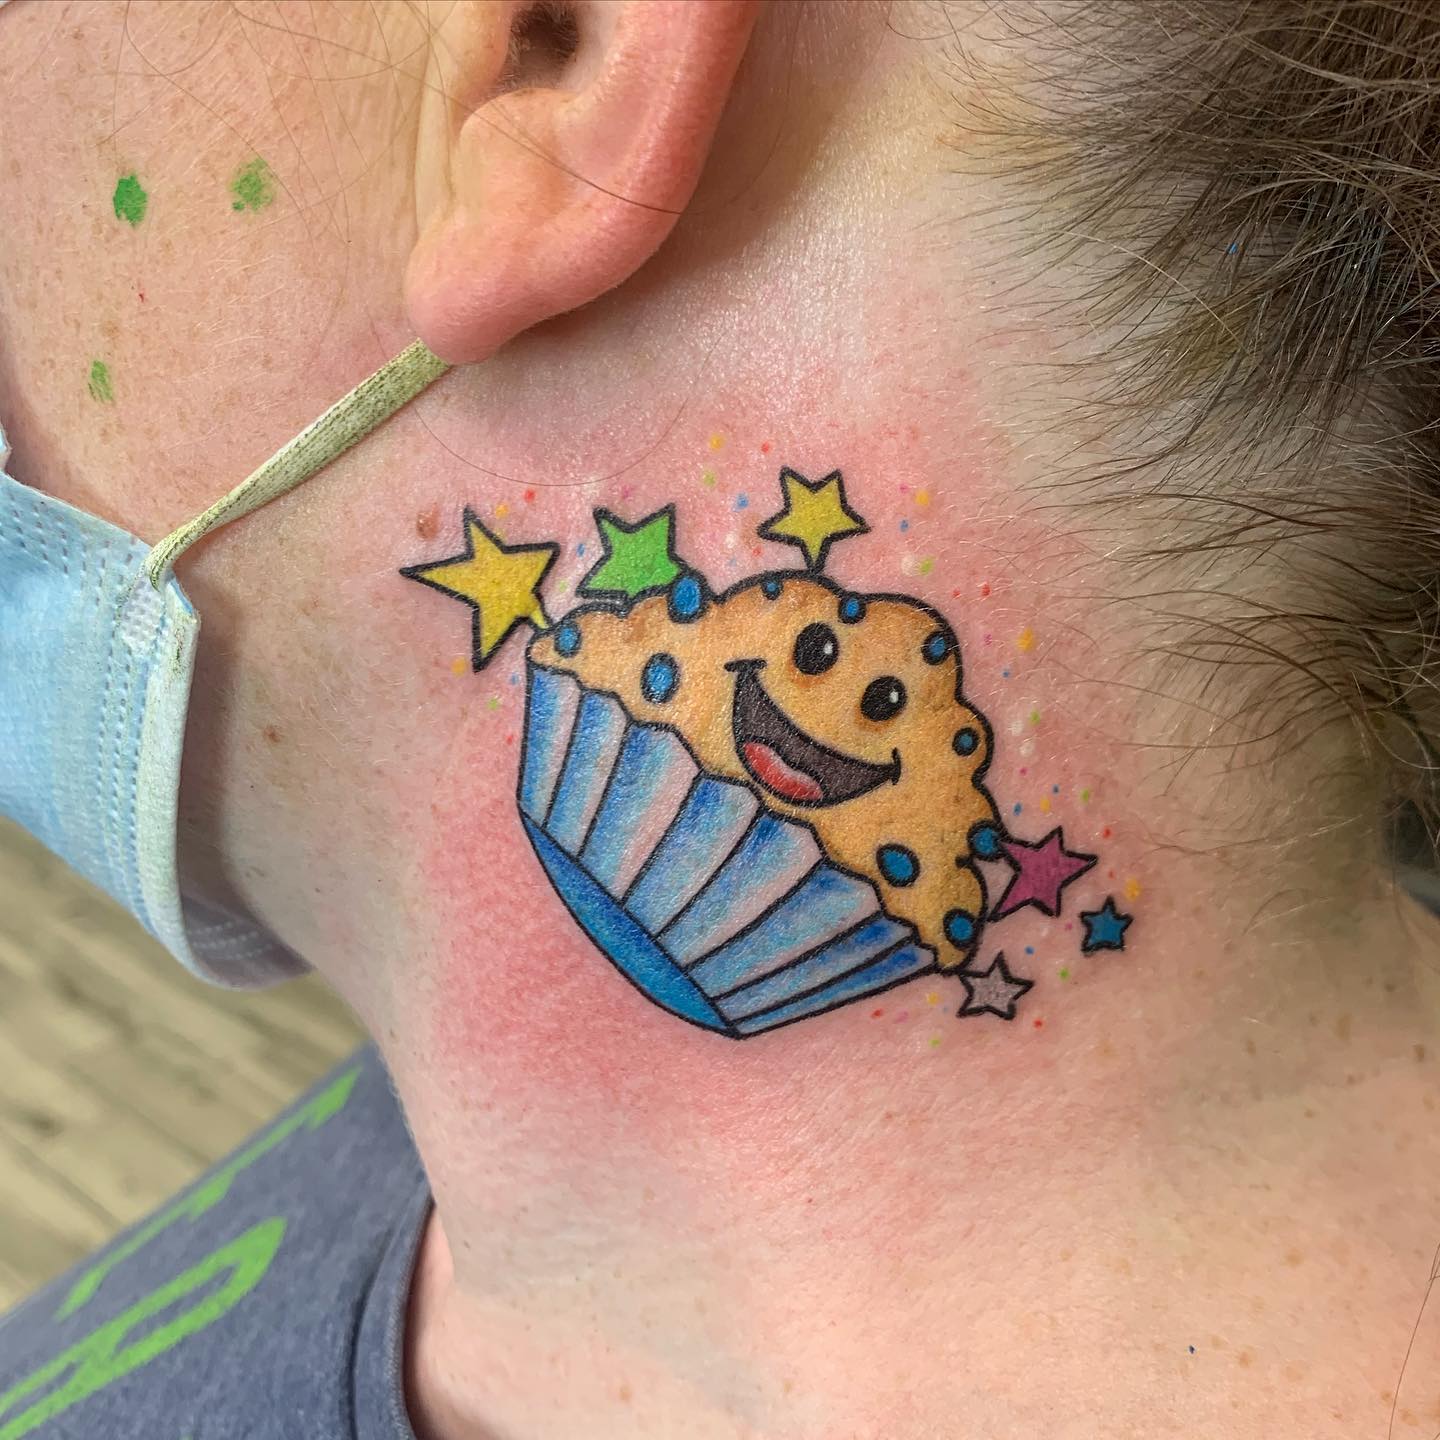 This adorable cupcake tattoo with colorful inks will indicate that you are fond of delicious cupcakes.